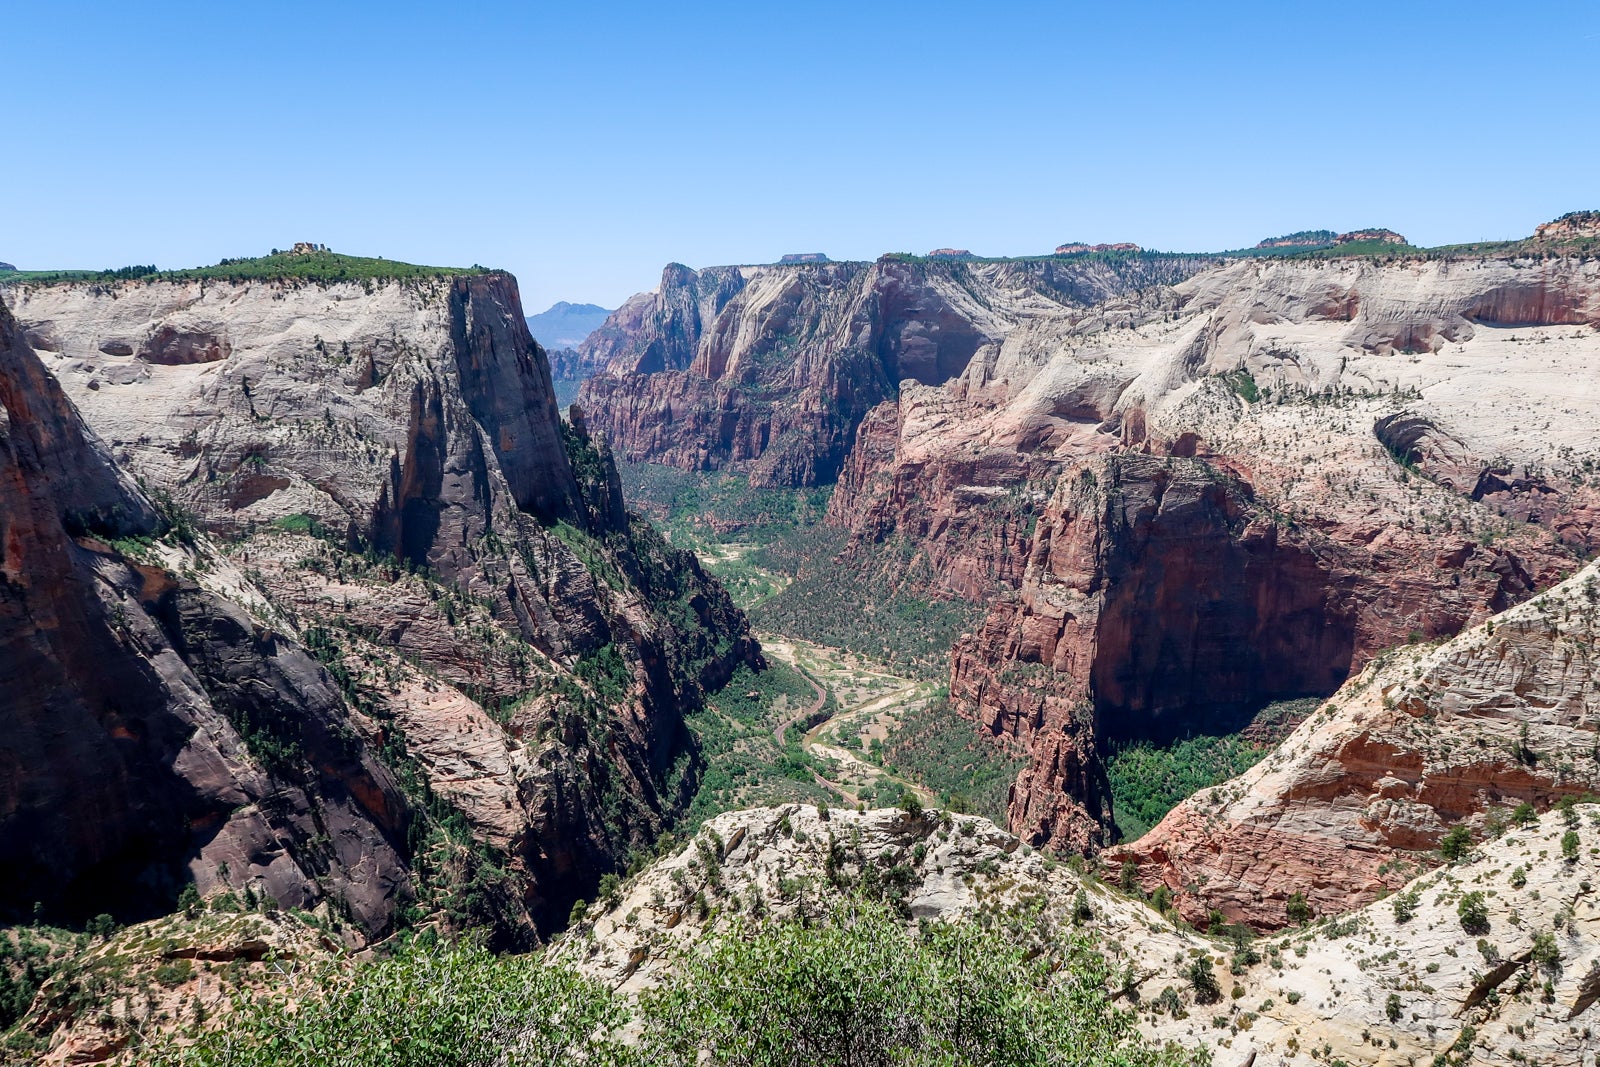 View from the Observation Point in Zion